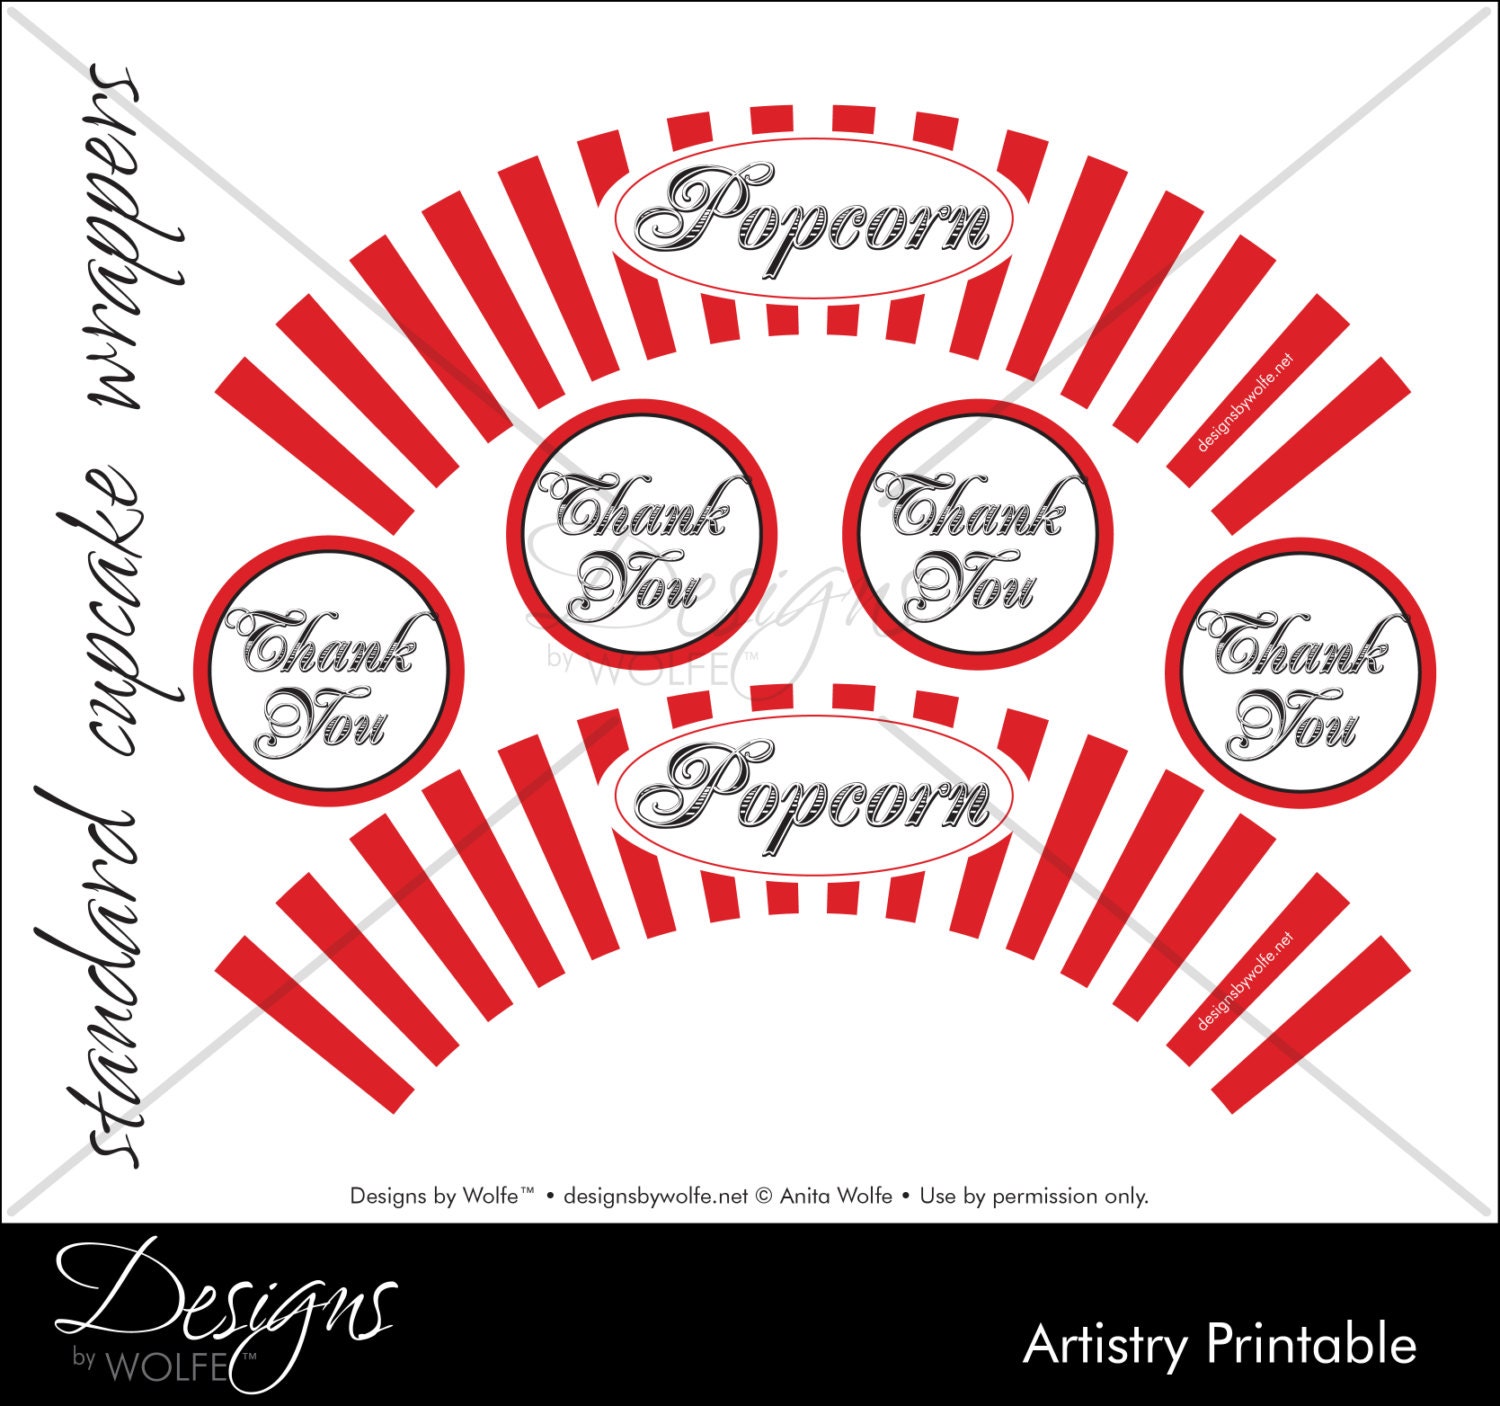 Printable Popcorn Designer Cupcake Wrappers by DesignsbyWolfe